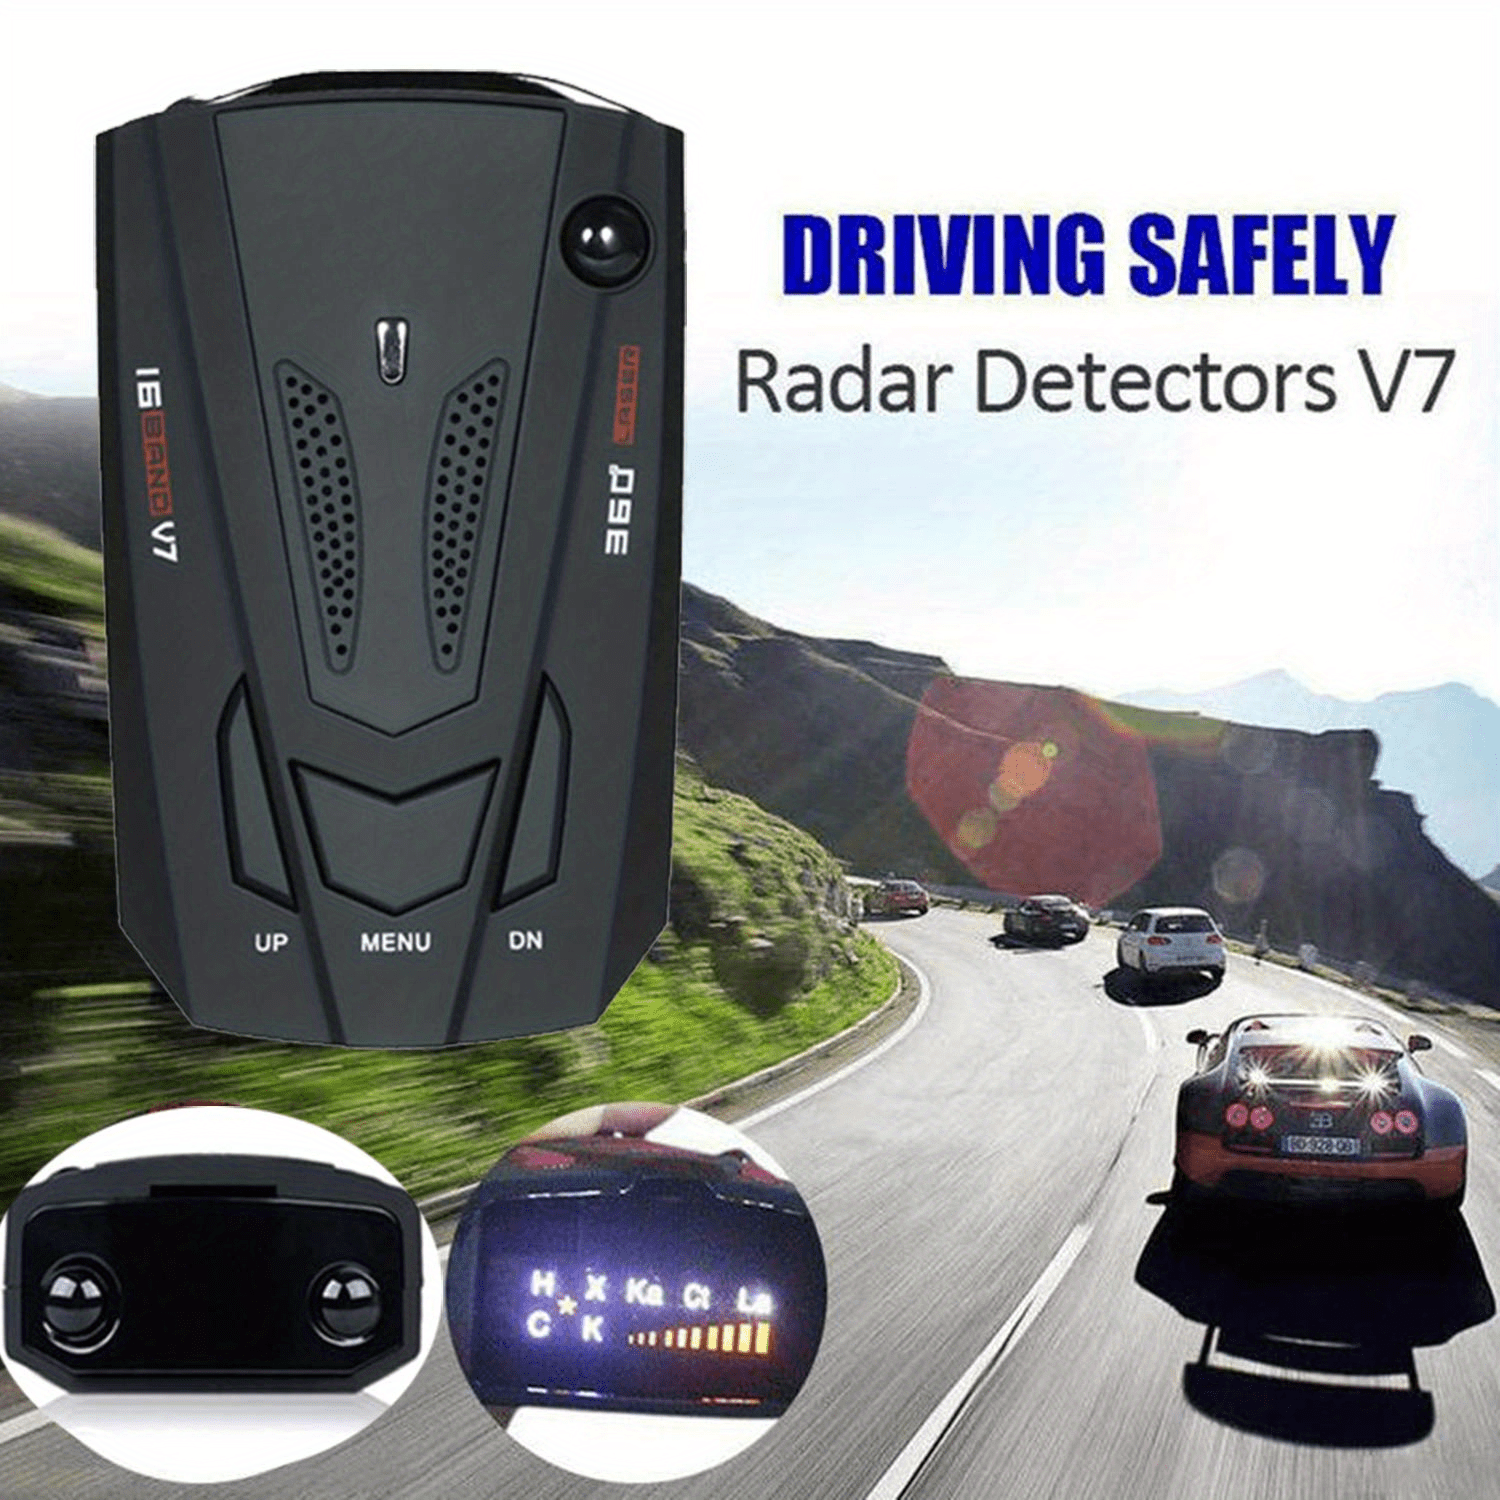 stay alert and drive safely laser radar detector with voice alert car speed alarm system and 360 detection details 0